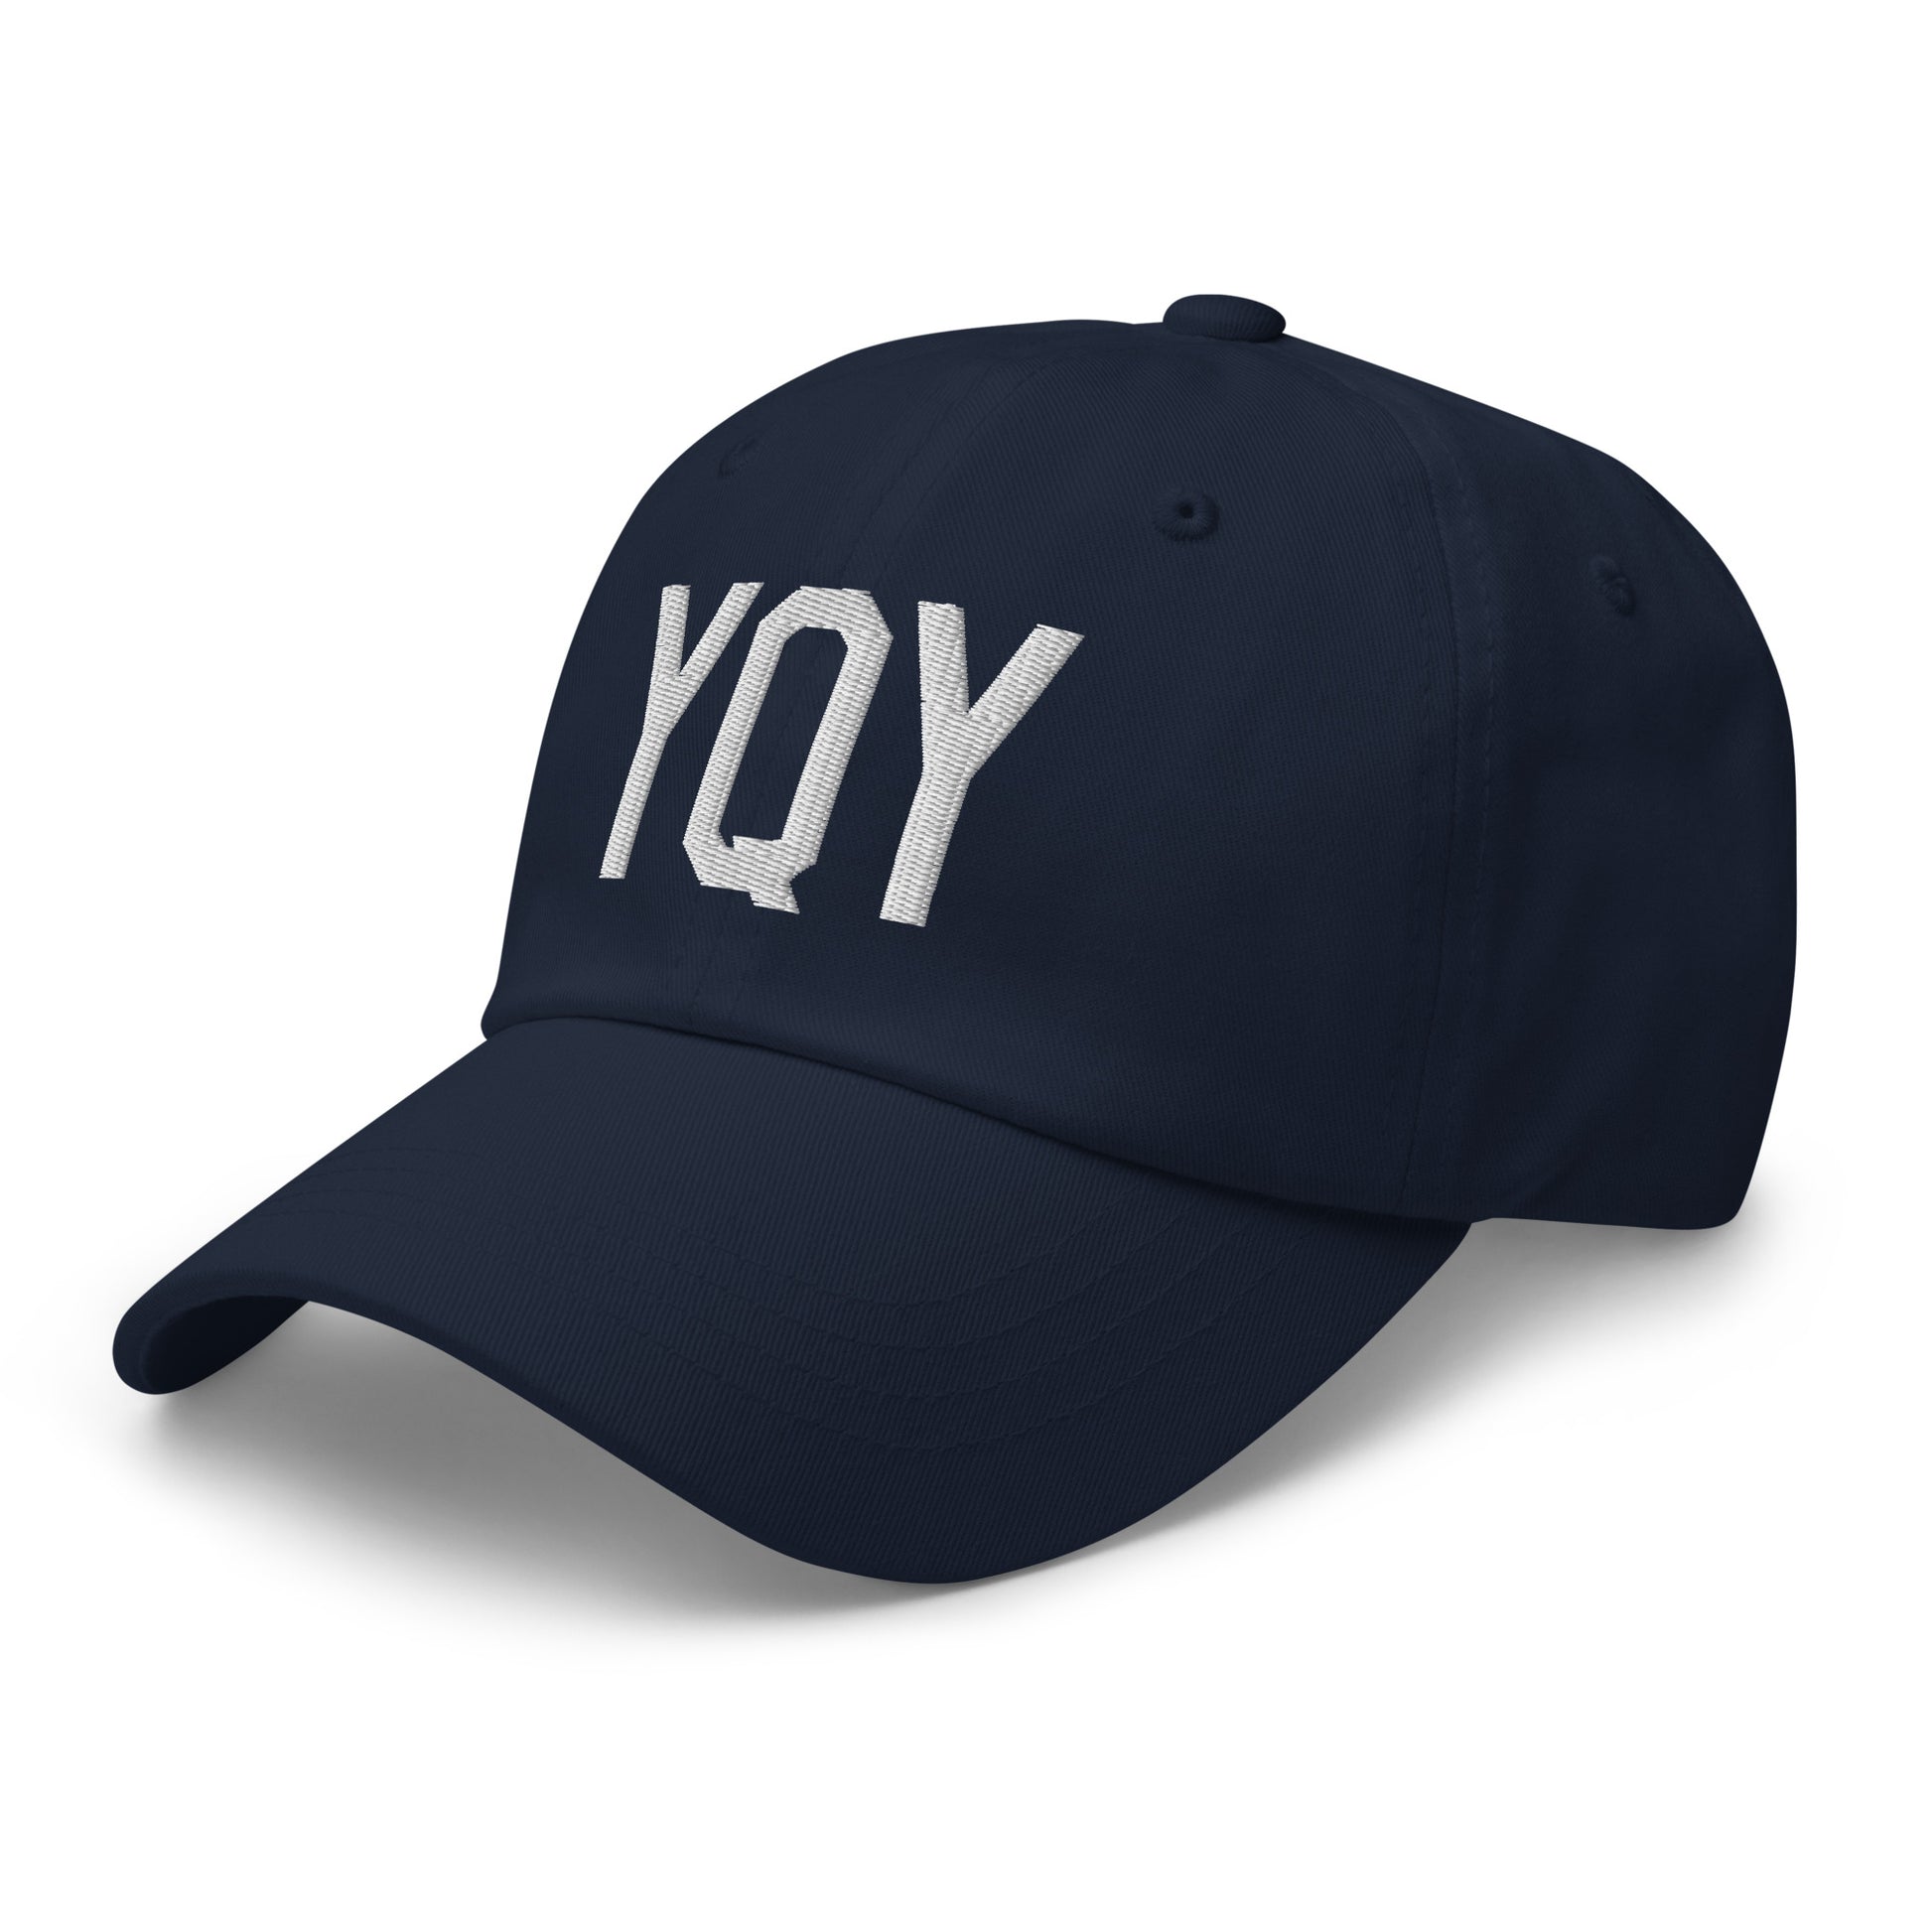 Airport Code Baseball Cap - White • YQY Sydney • YHM Designs - Image 18